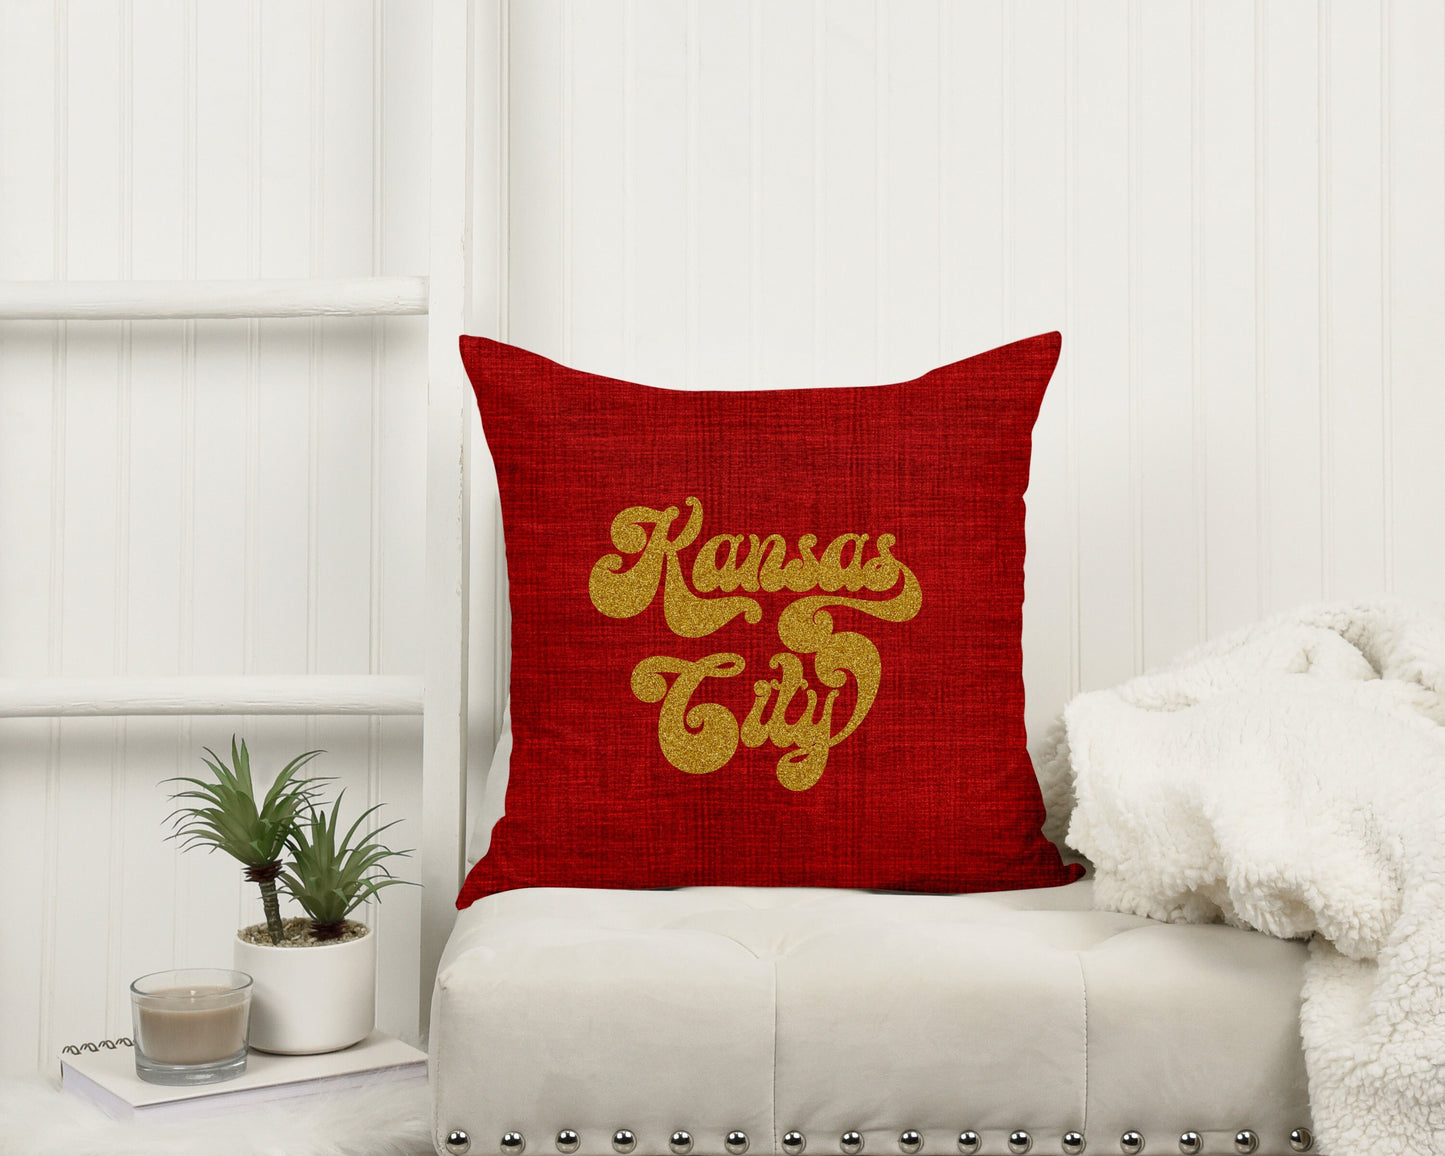 Made in KC Kansas City Retro Pillow CASE - Perfect for game day! Housewarming Gift - Football - First Apartment/House